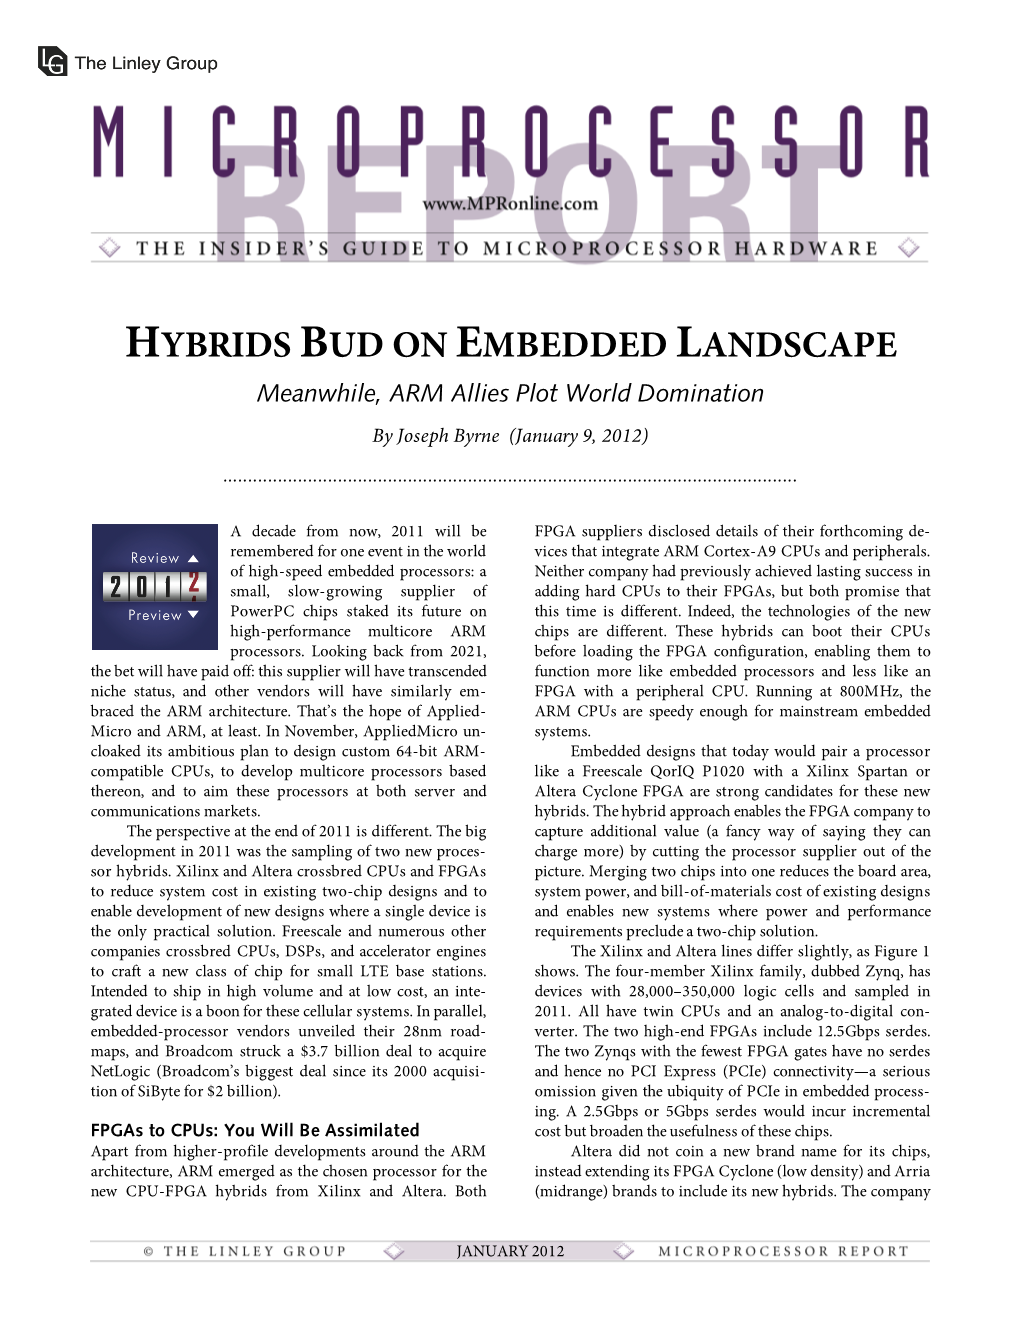 HYBRIDS BUD on EMBEDDED LANDSCAPE Meanwhile, ARM Allies Plot World Domination by Joseph Byrne (January 9, 2012)